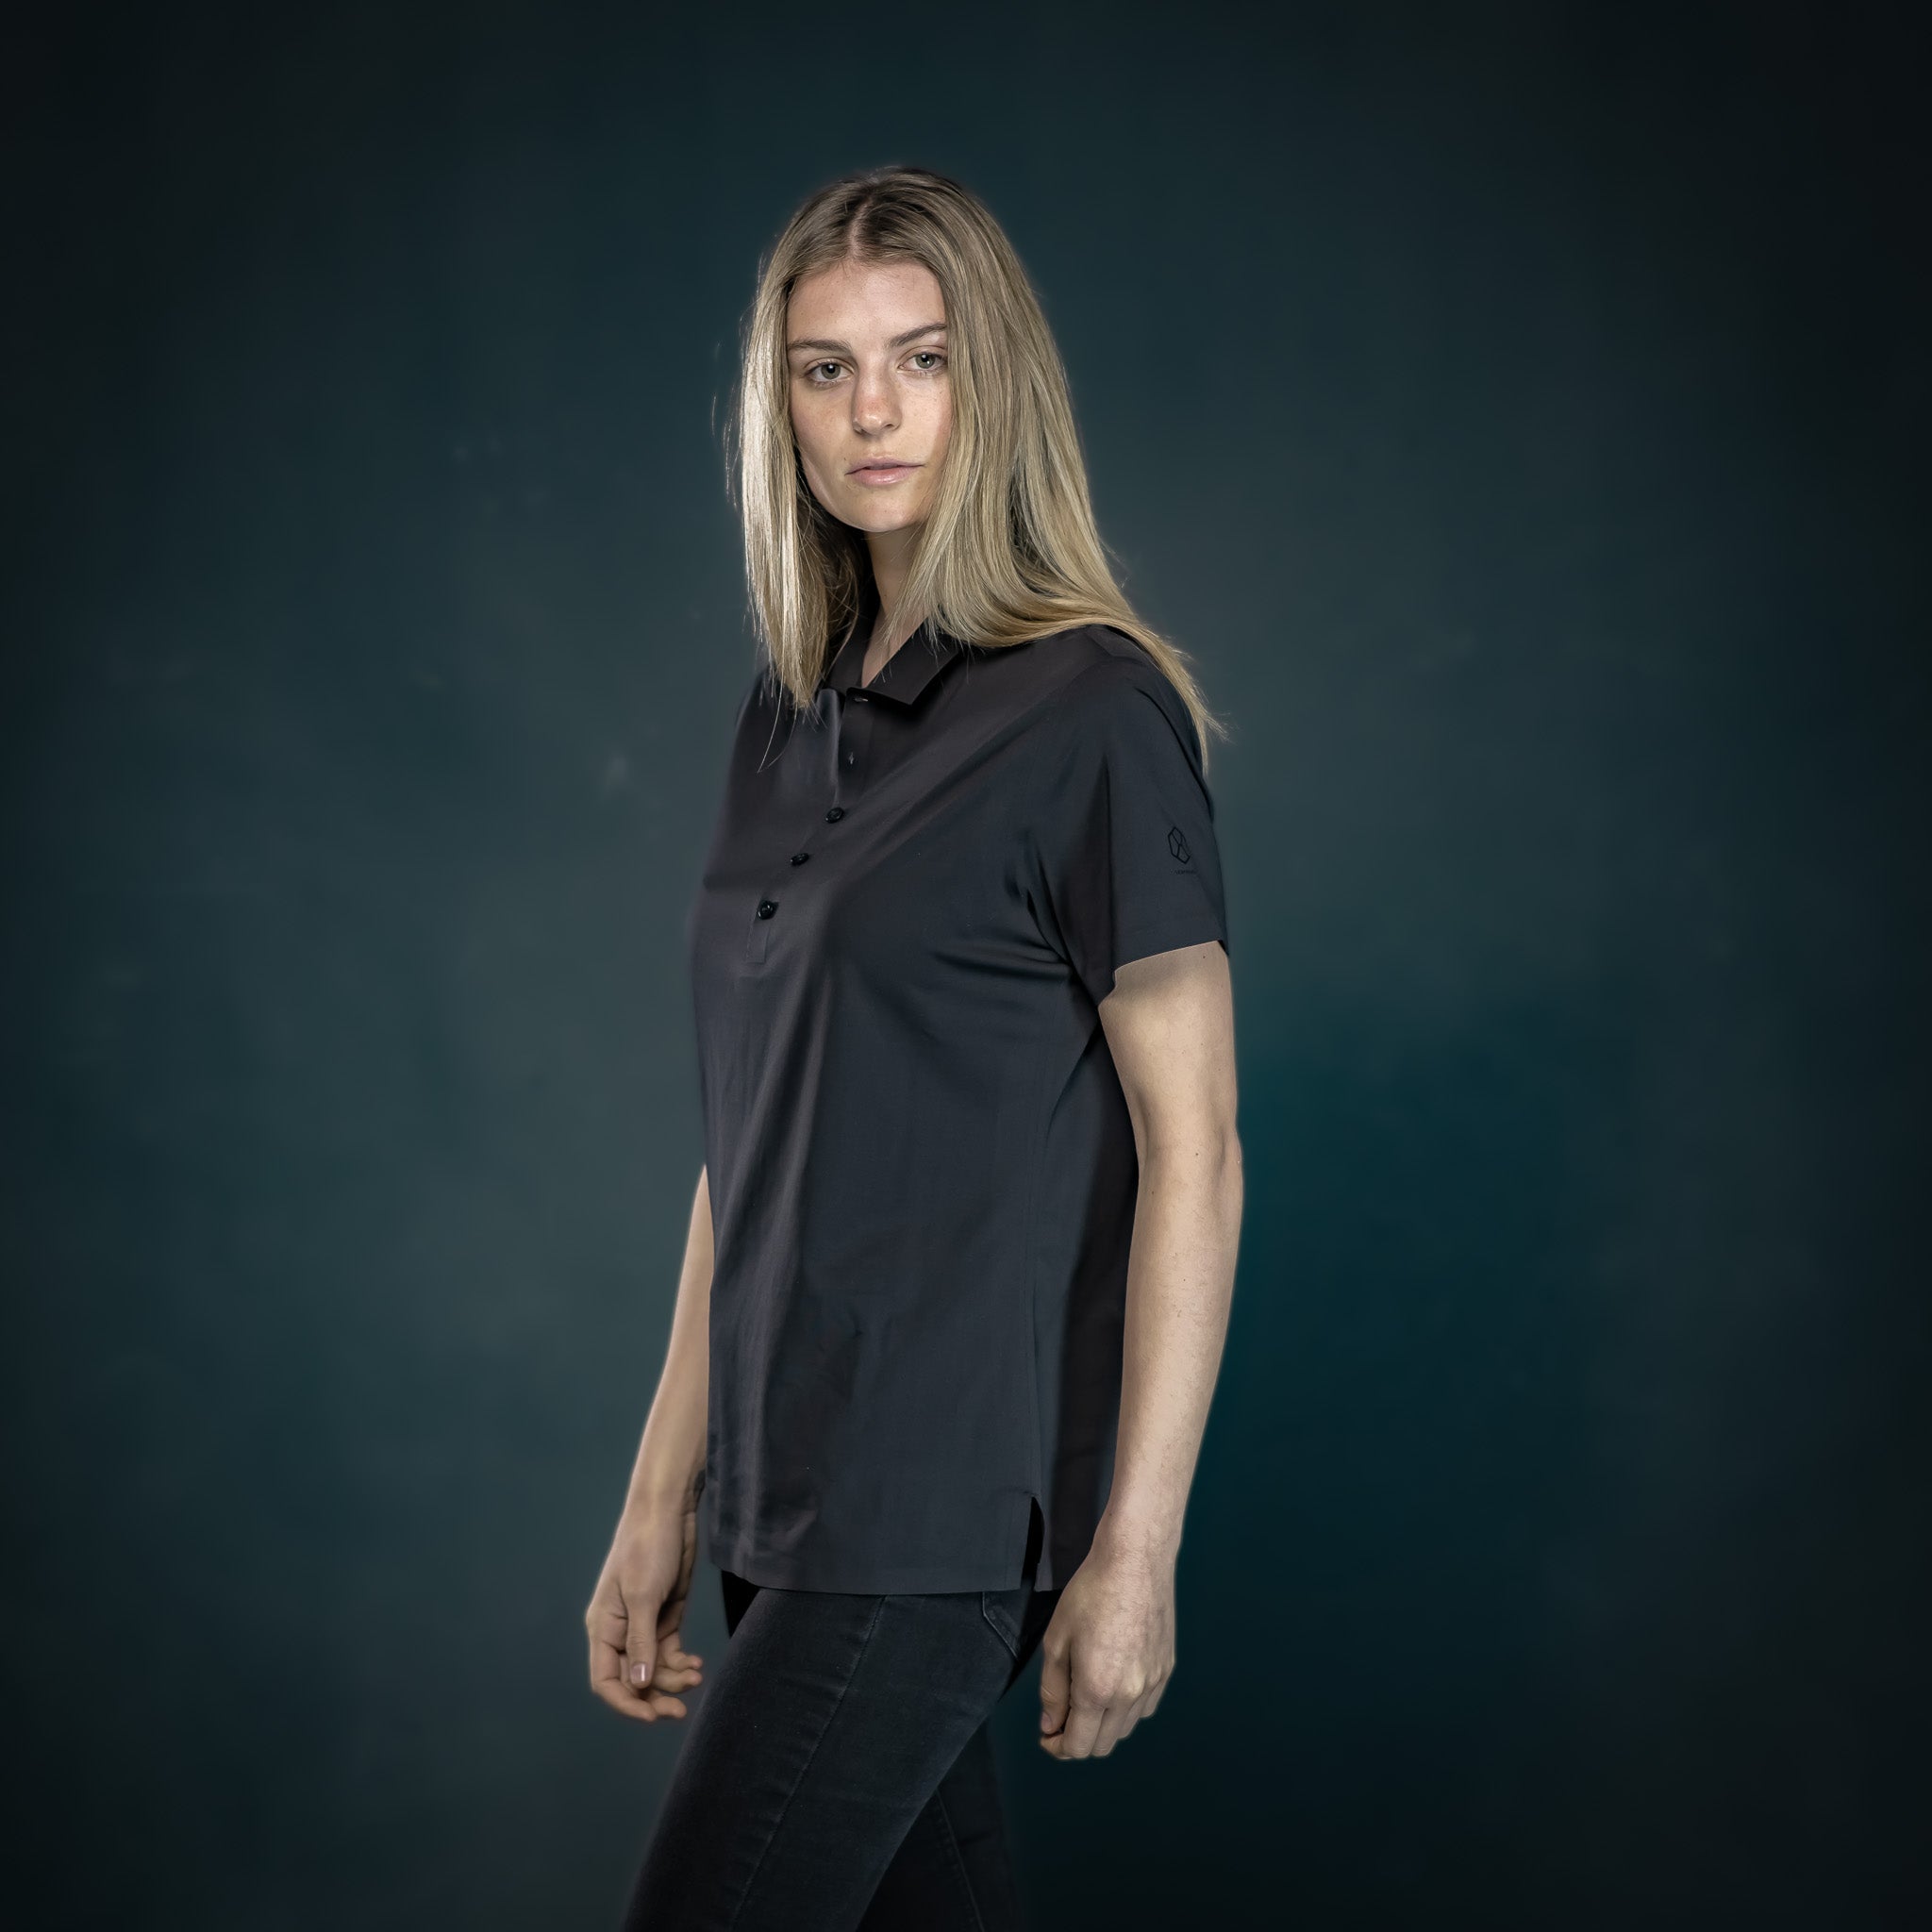 All Rounder Polo Shirt (Women) / Everyday Performance Series